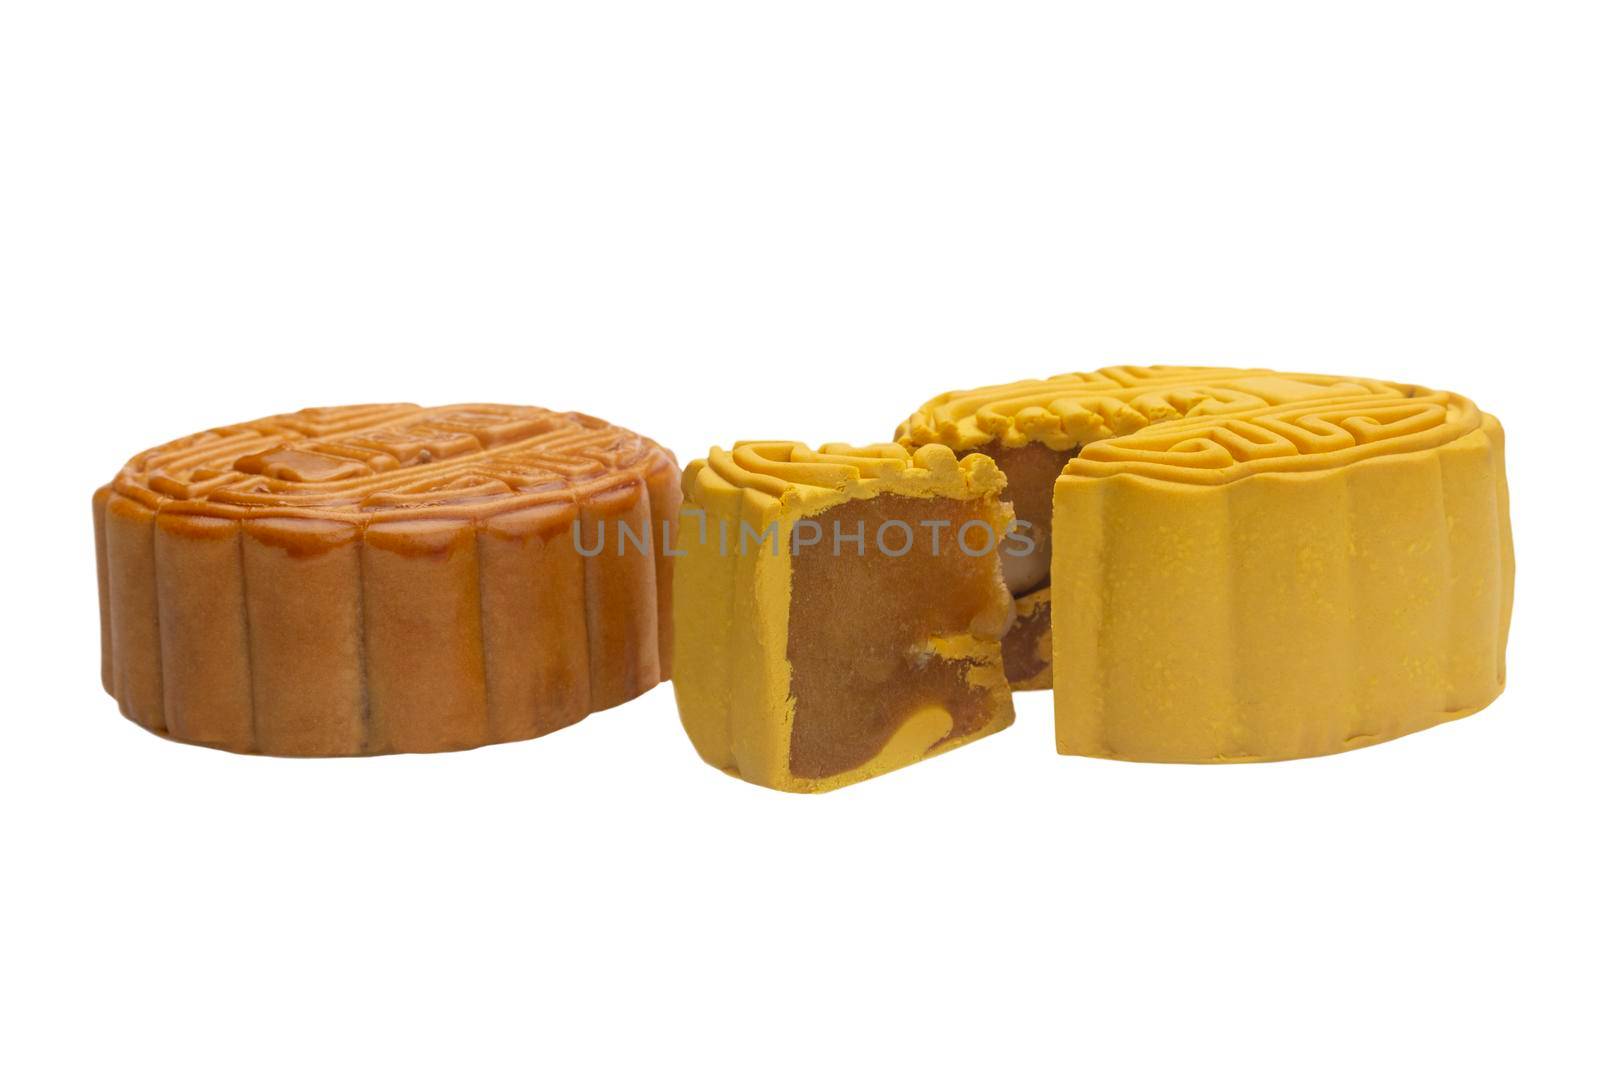 Traditional mooncake with durian and nuts filling on white background, Clipping path included by toa55